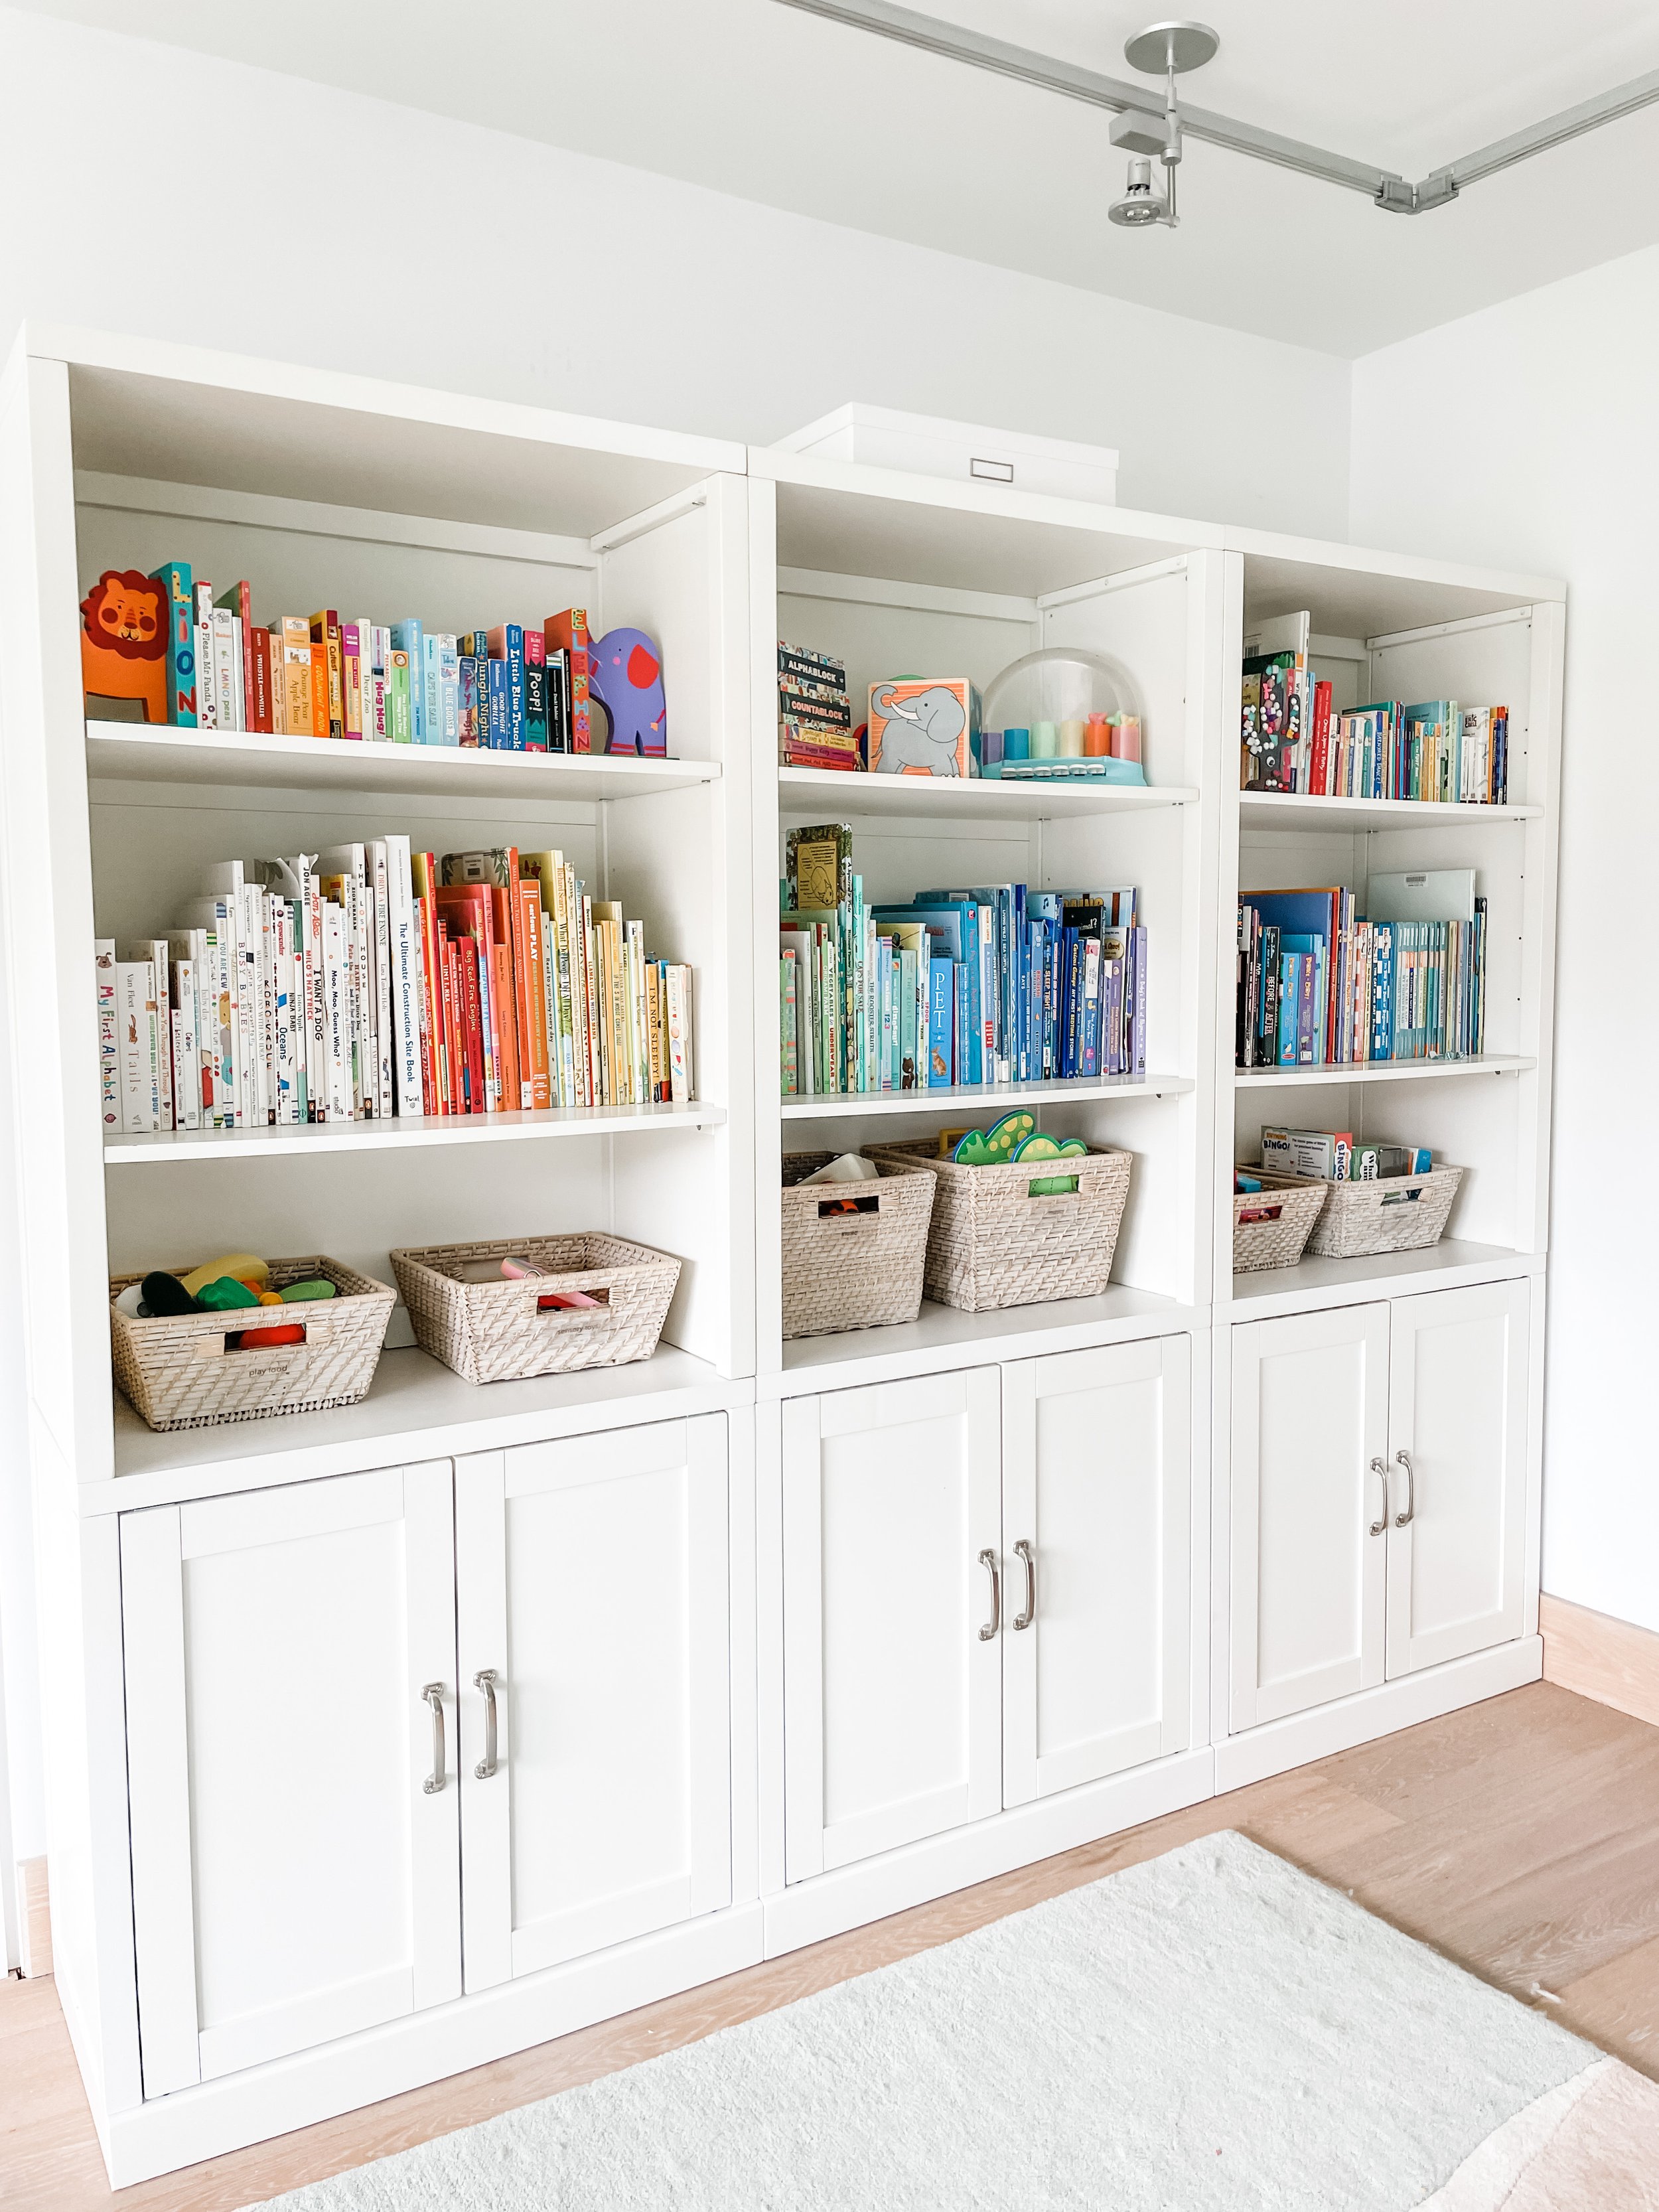 Built-in white cabinets and shelves with books arranged in a rainbow pattern